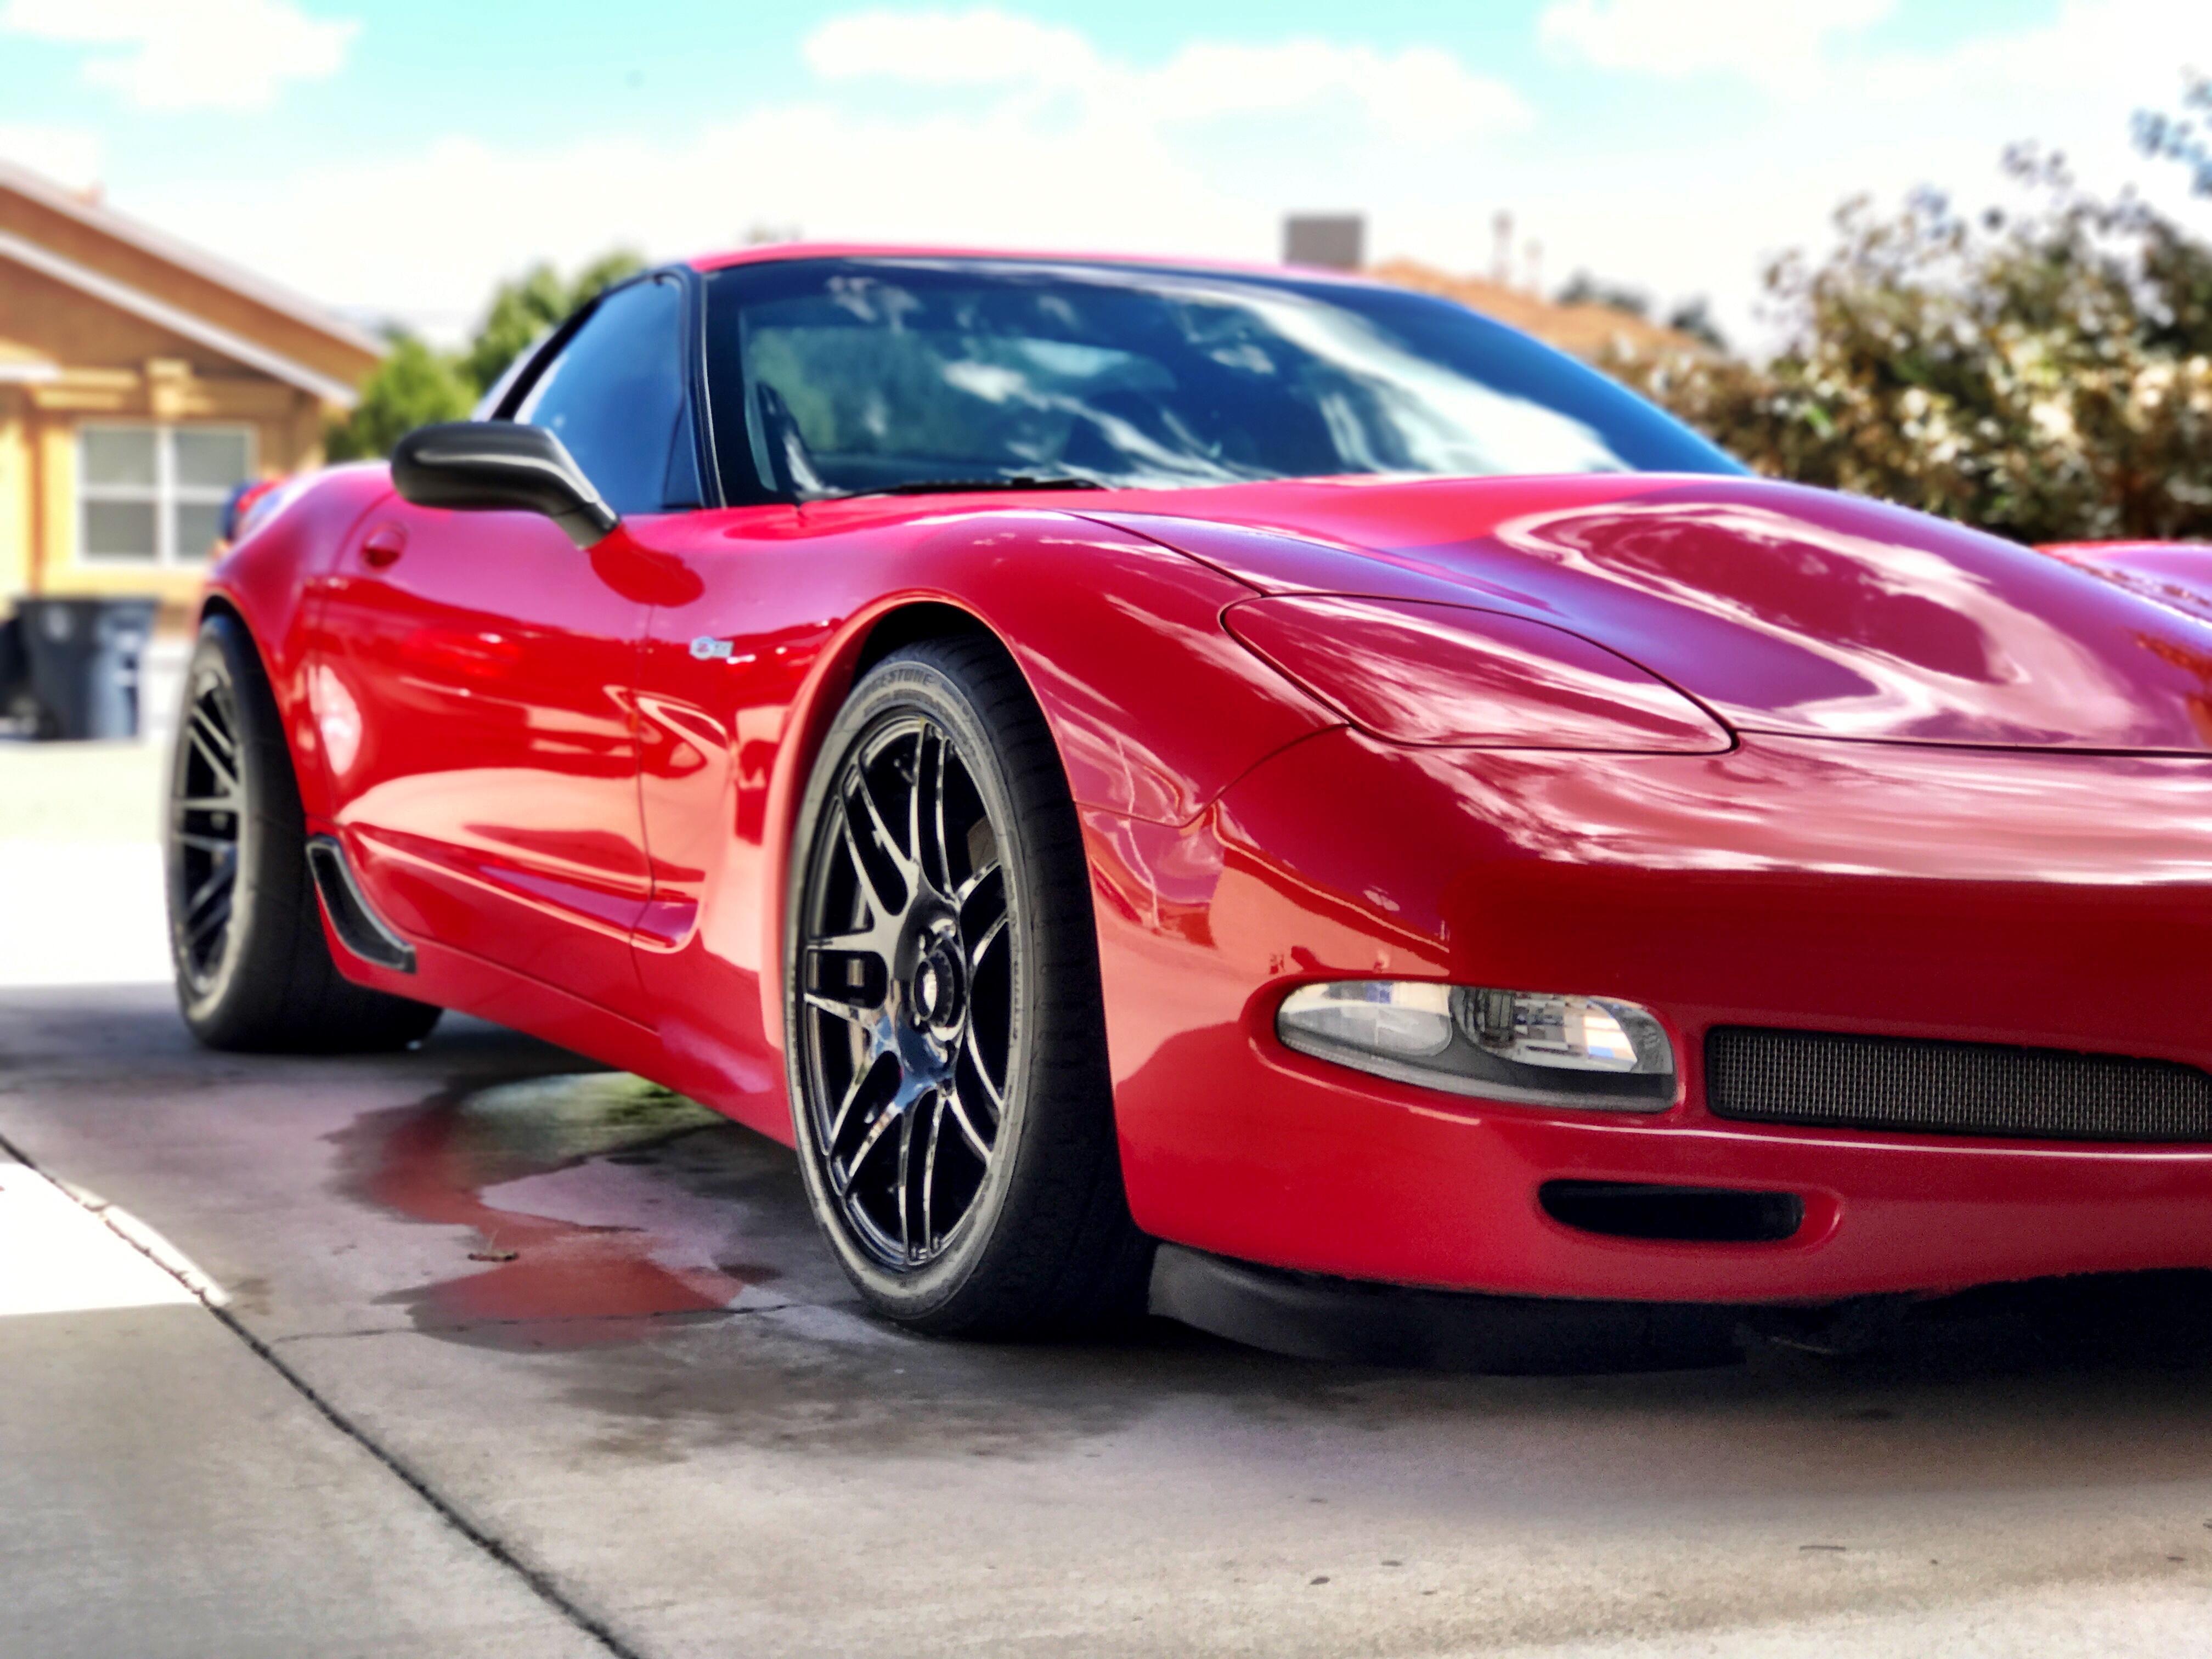 What Are Your Favorite C5 Corvette Wheel Options? - Page 8